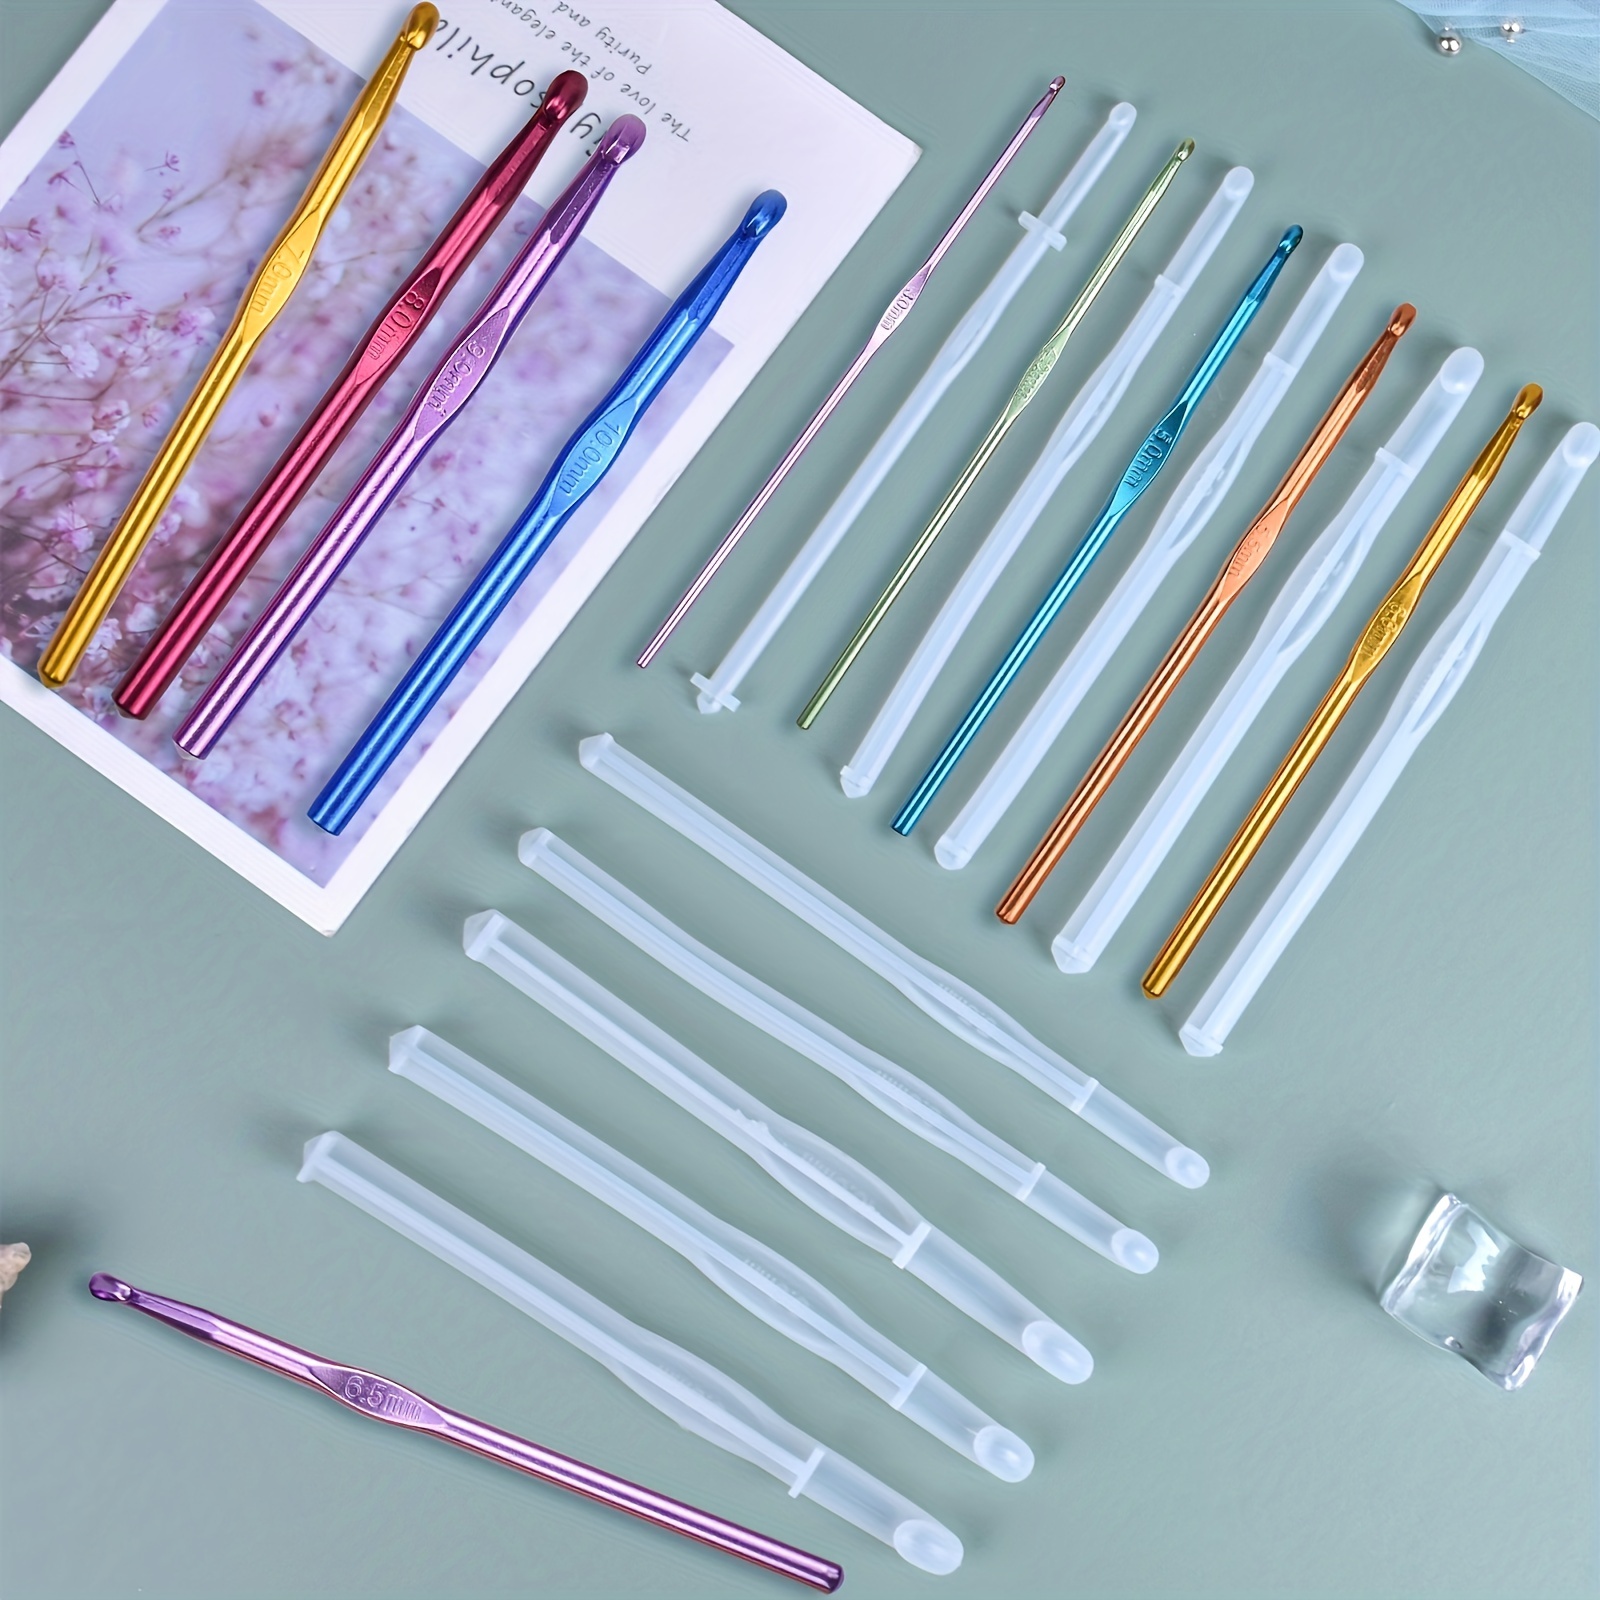 Trying something new: Making resin crochet hooks from scratch 